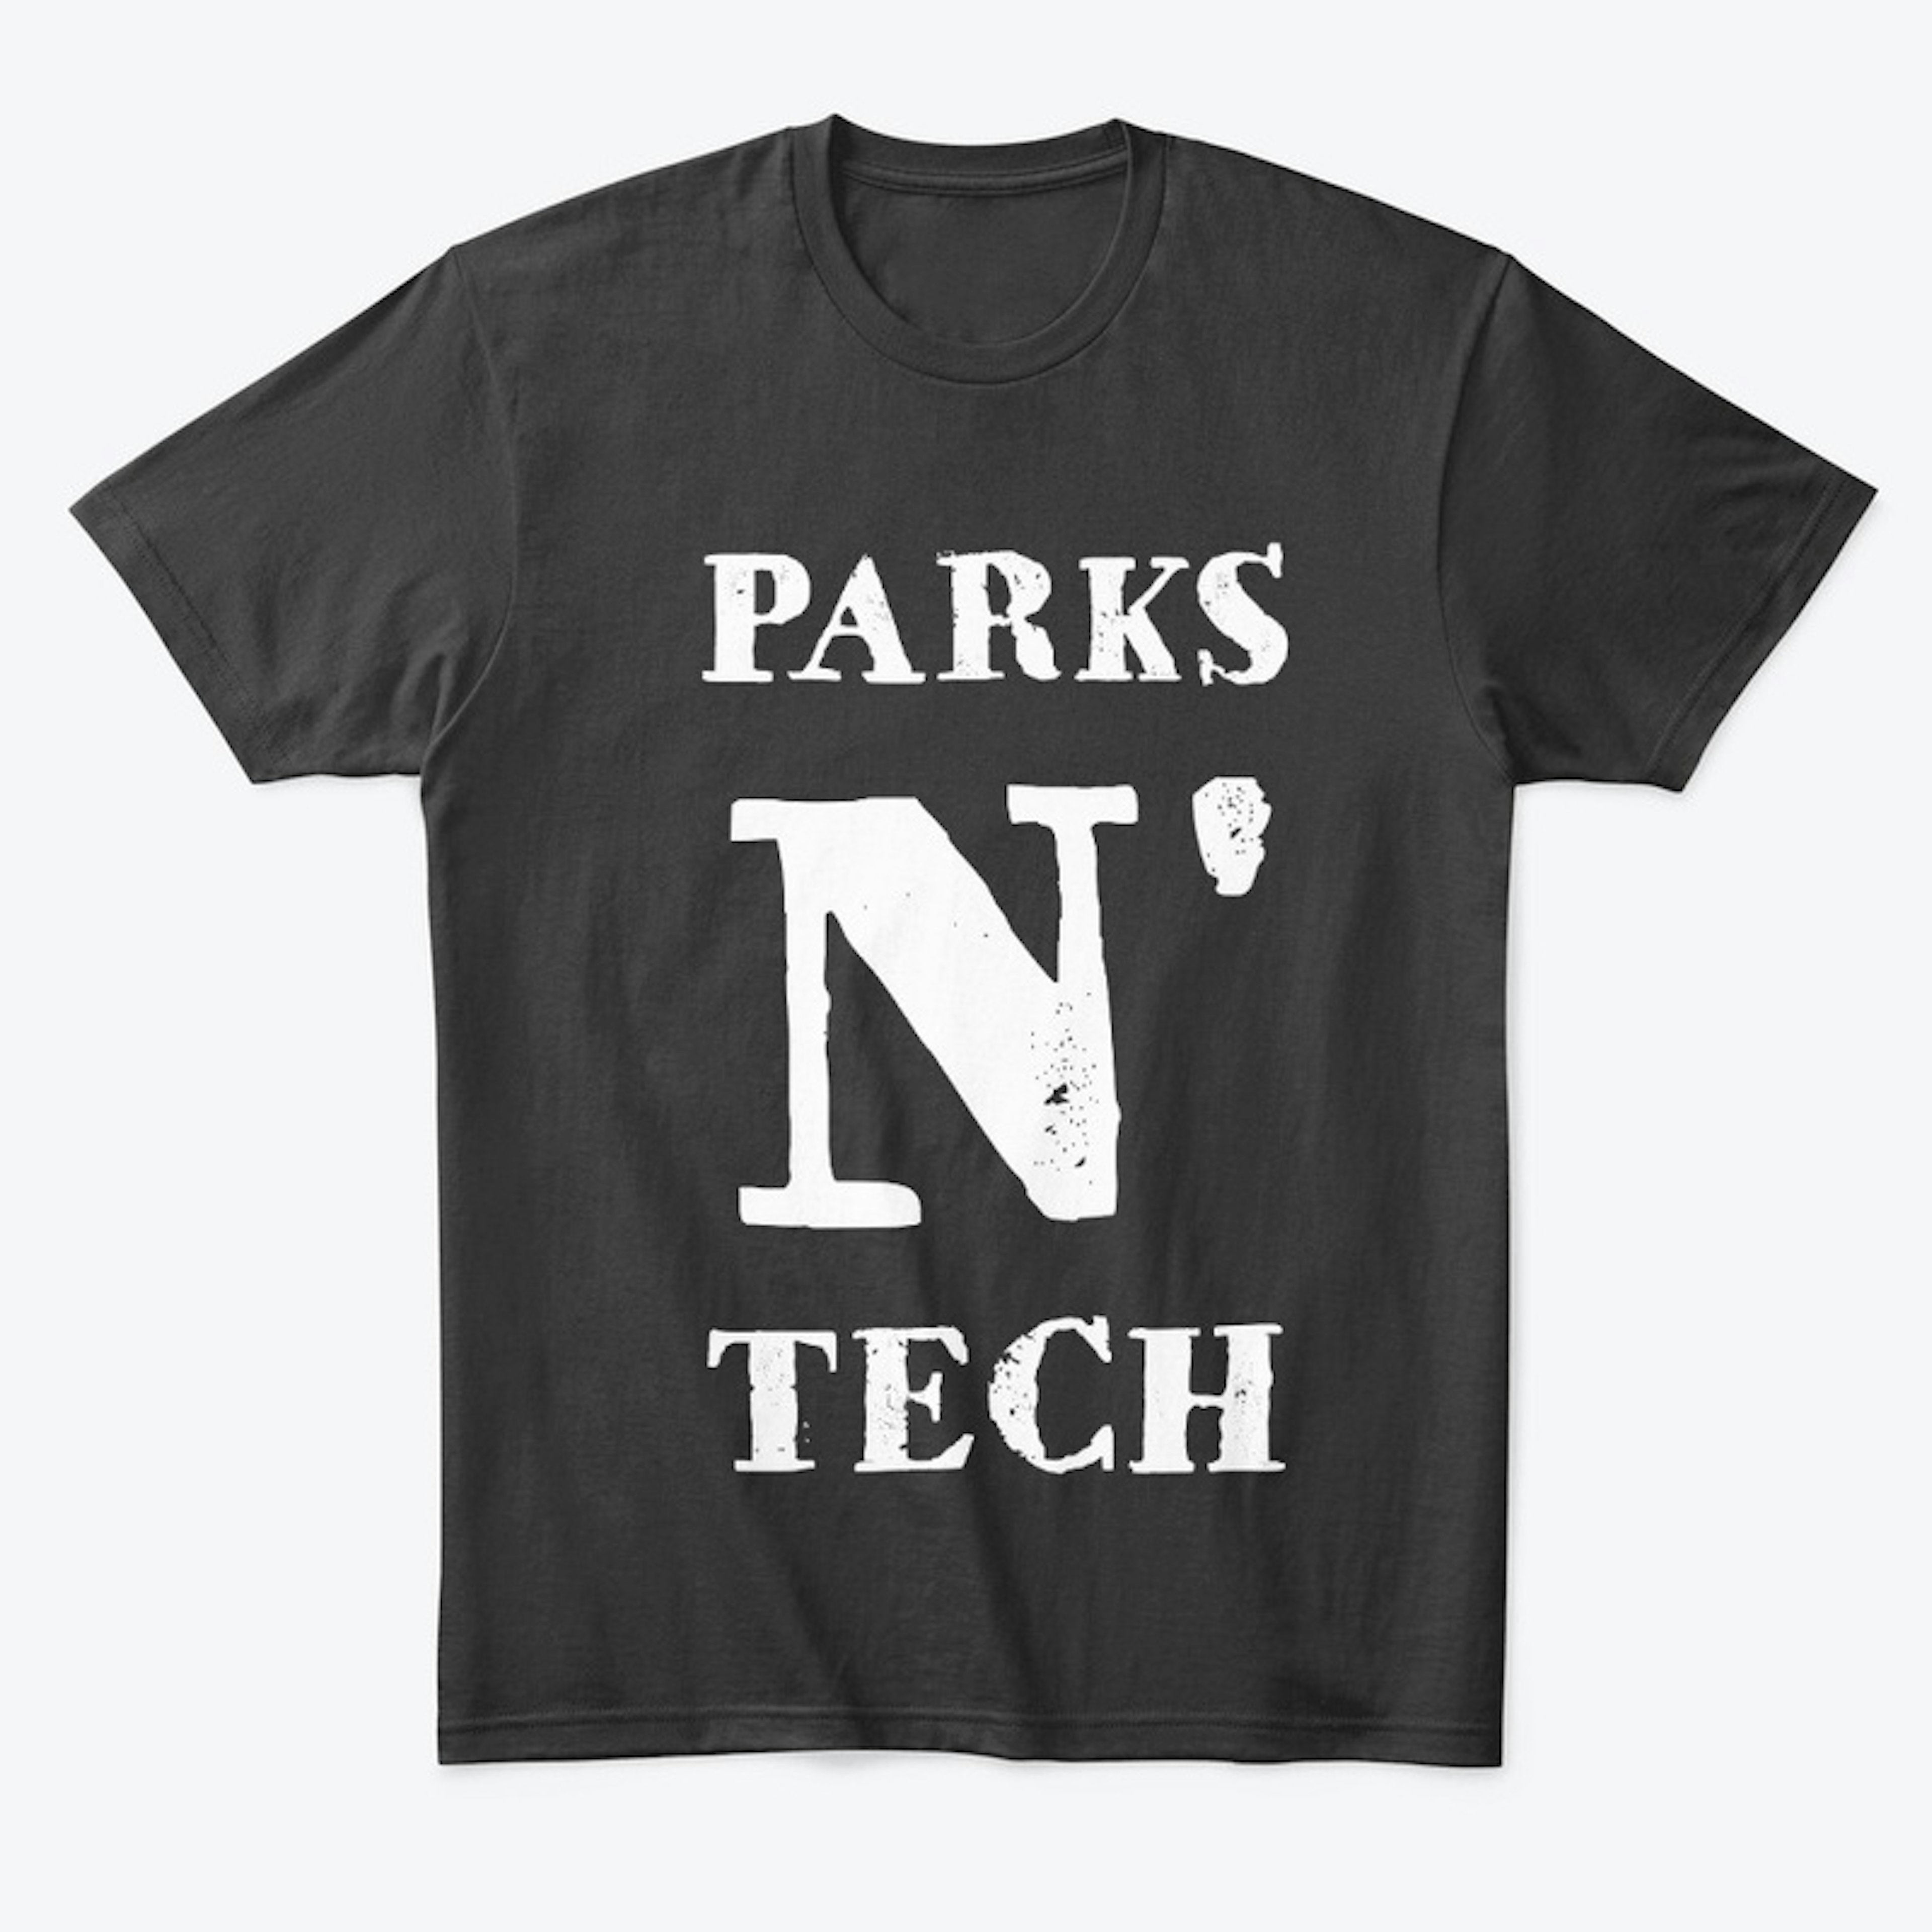 Parks N' Tech - The One You Want